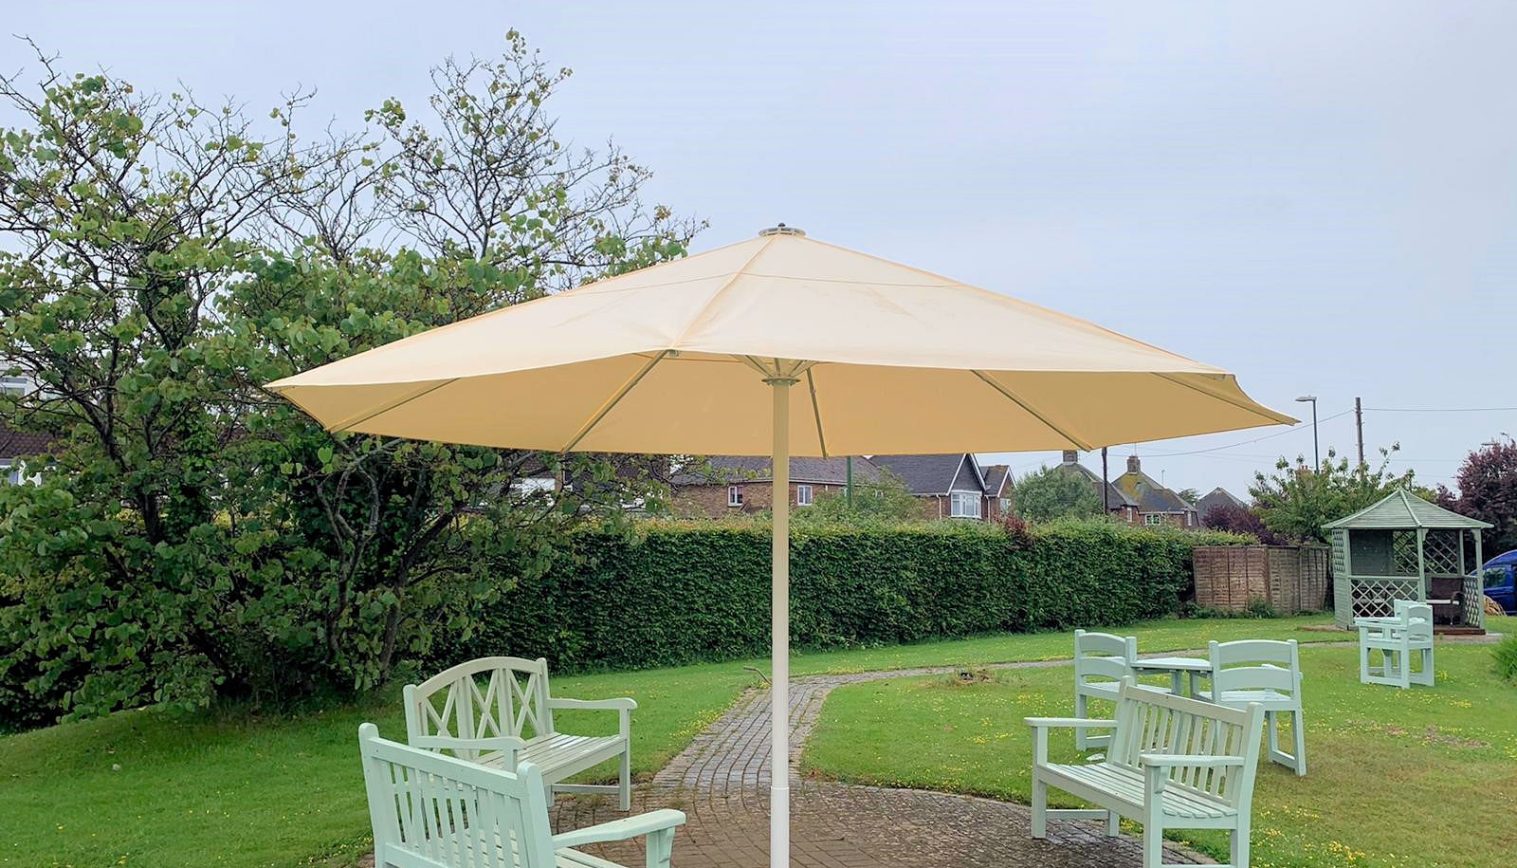 Oakland Grange Carehome – Free Standing Canopy